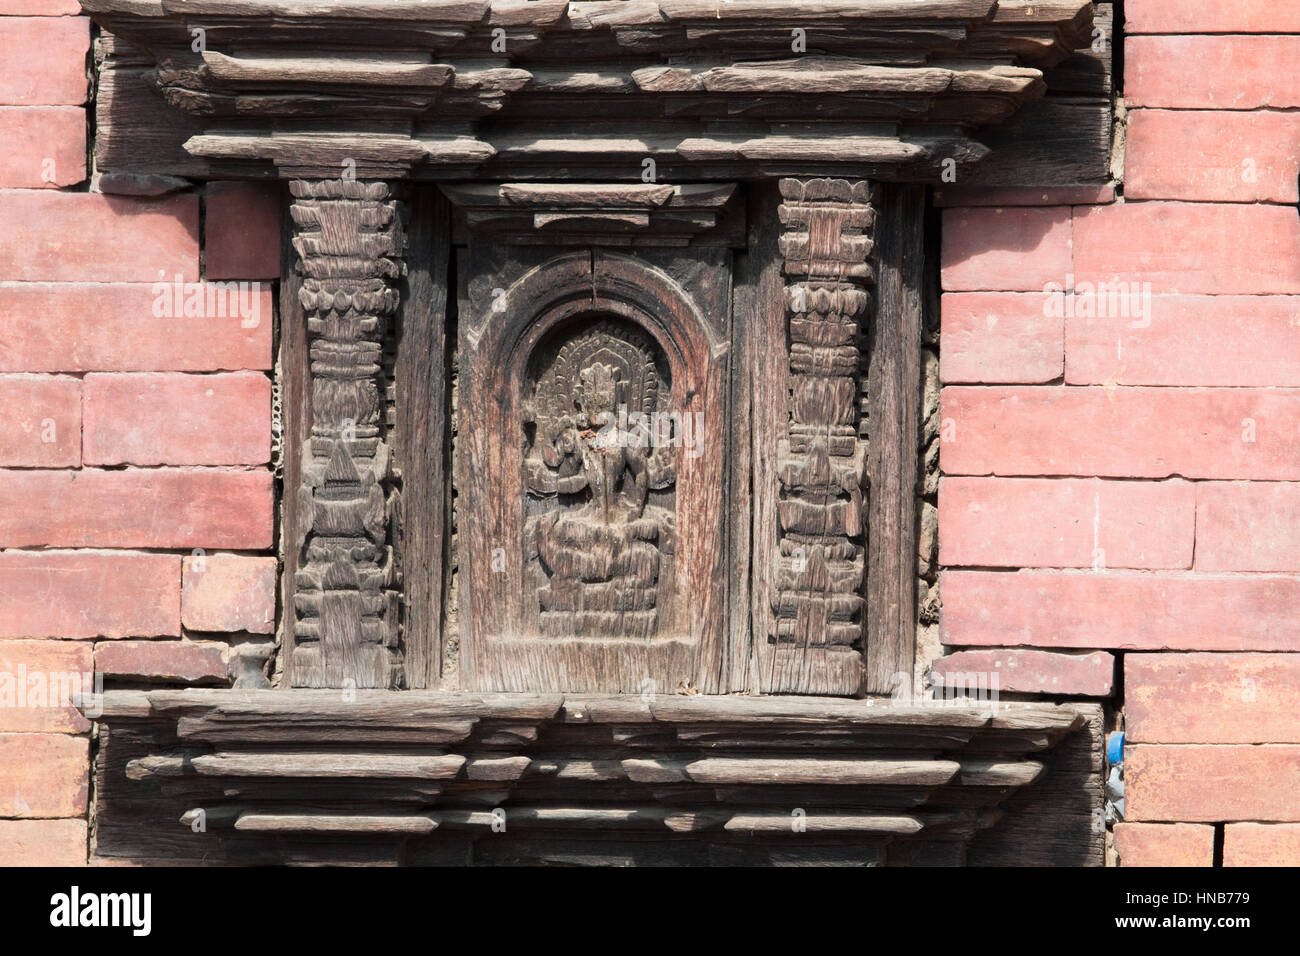 Wood carving of a Hindu god on a panel outside a building in Patan square, Kathmandu, Nepal Stock Photo